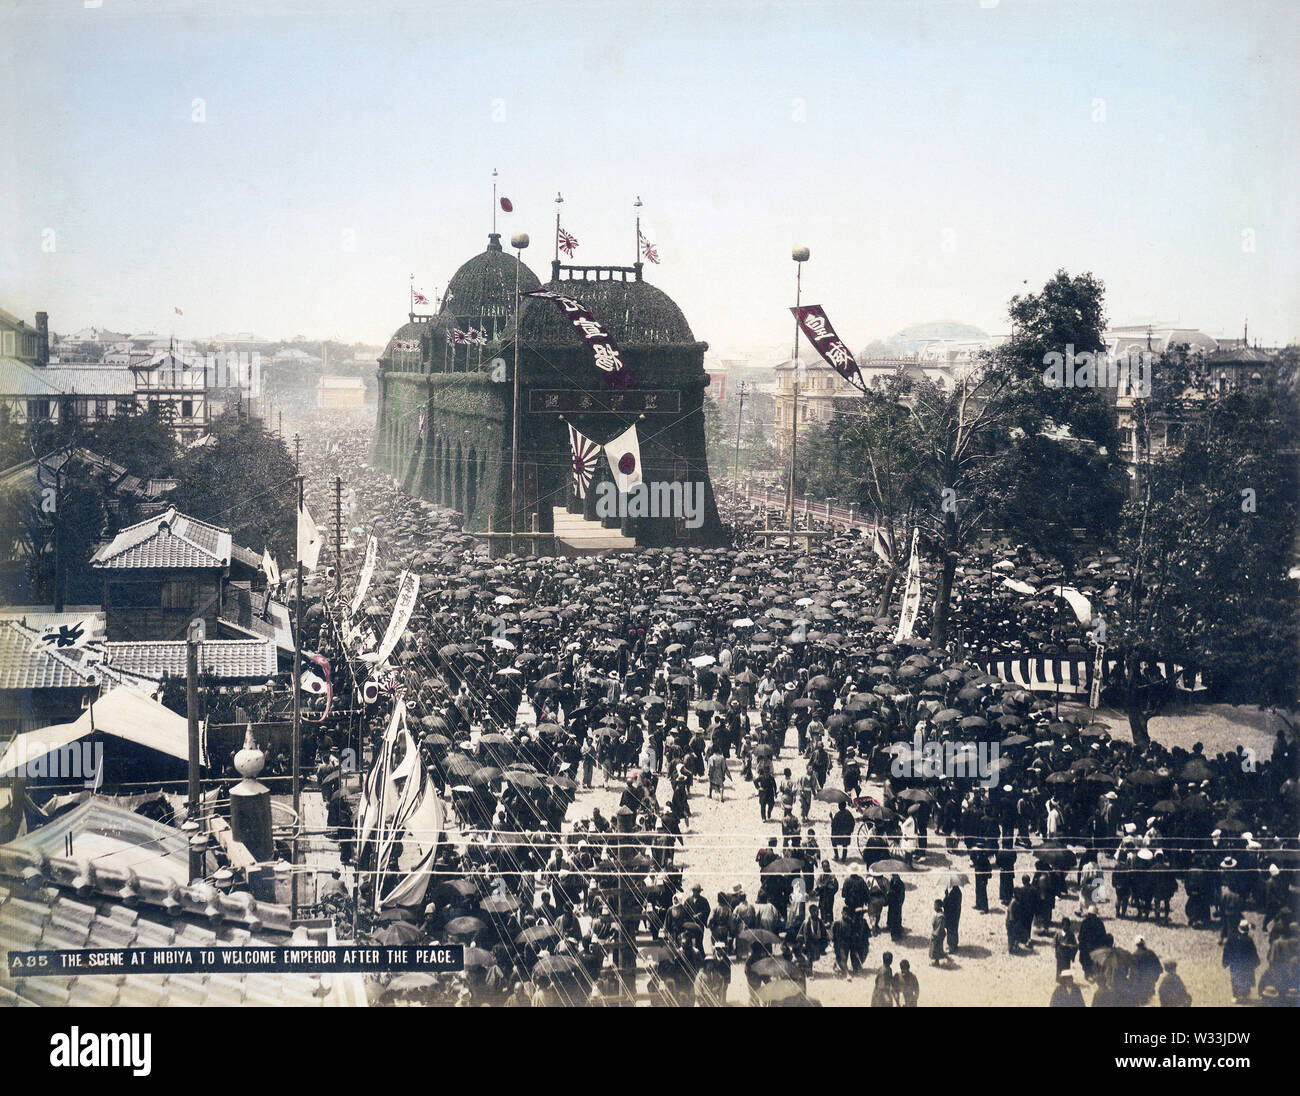 [ 1890s Japan - Welcome Ceremony for Japanese Emperor ] —   The triumphal arch made in Tokyo's Hibiya district to welcome Emperor Meiji back to the capital after the conclusion of the First Sino-Japanese War (1894–1895). This shows the scene on May 30, 1895 (Meiji 28) when hundreds of thousands of people had taken to the street for the Emperor's Welcome Ceremony.  19th century vintage albumen photograph. Stock Photo